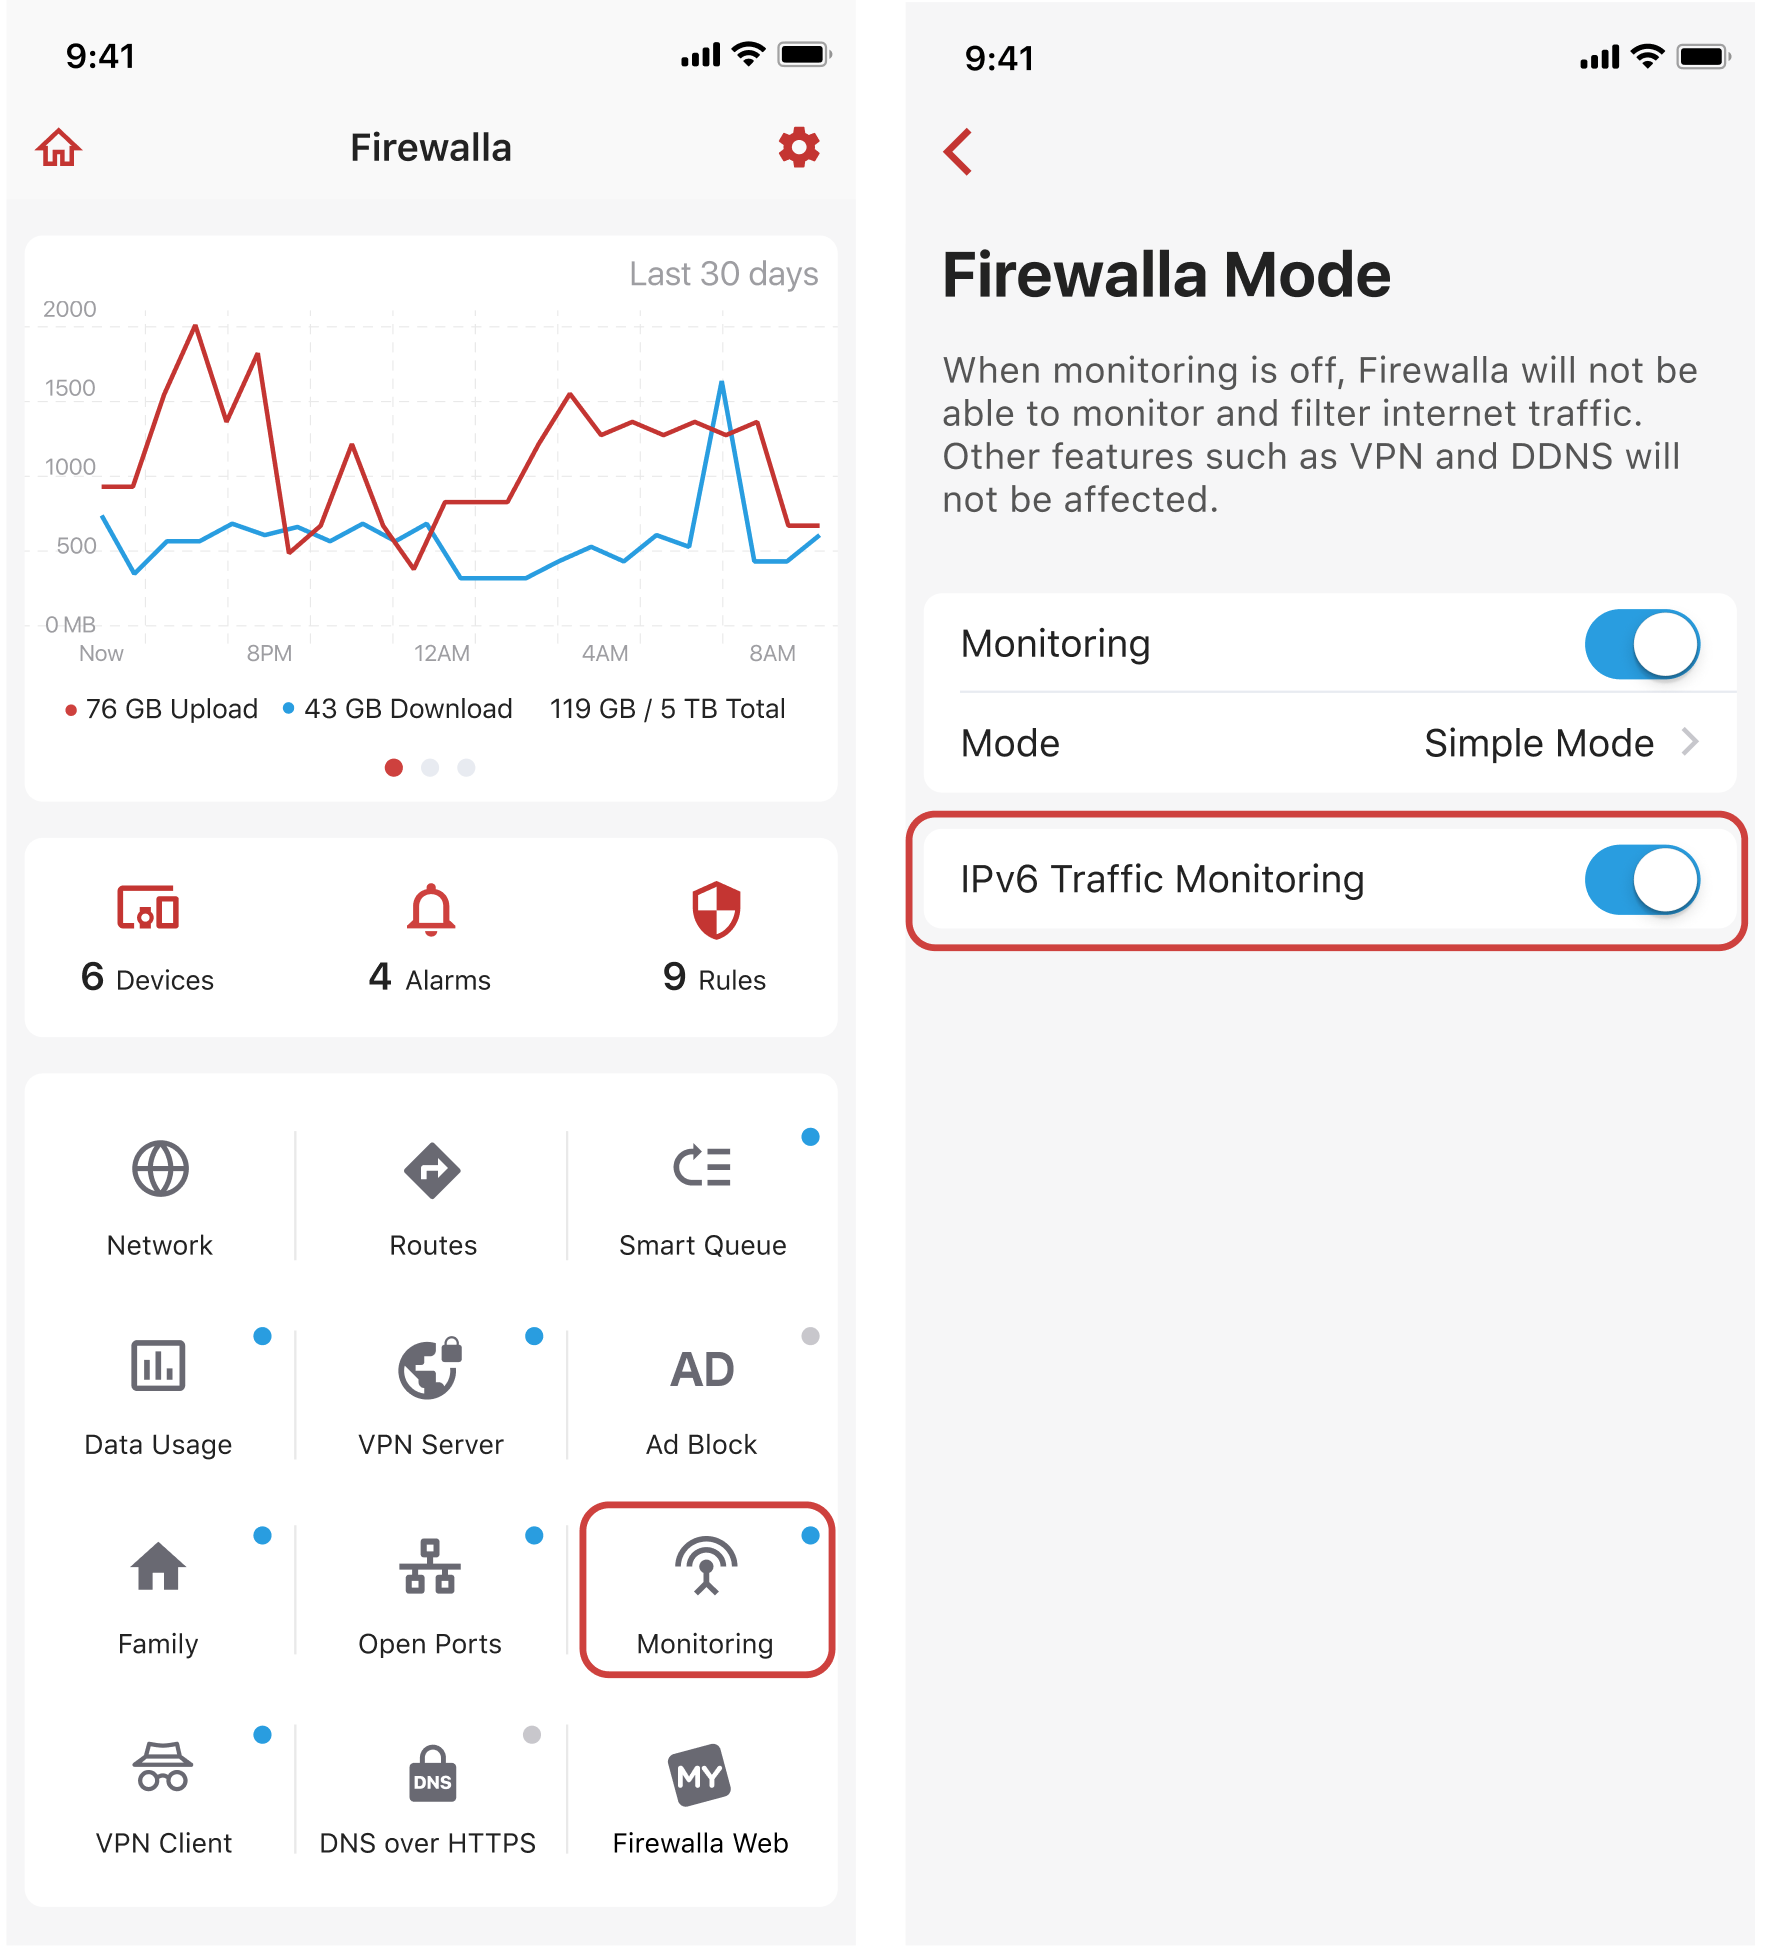  Disable or Enable IPv6 Traffic Monitoring in the Firewalla app